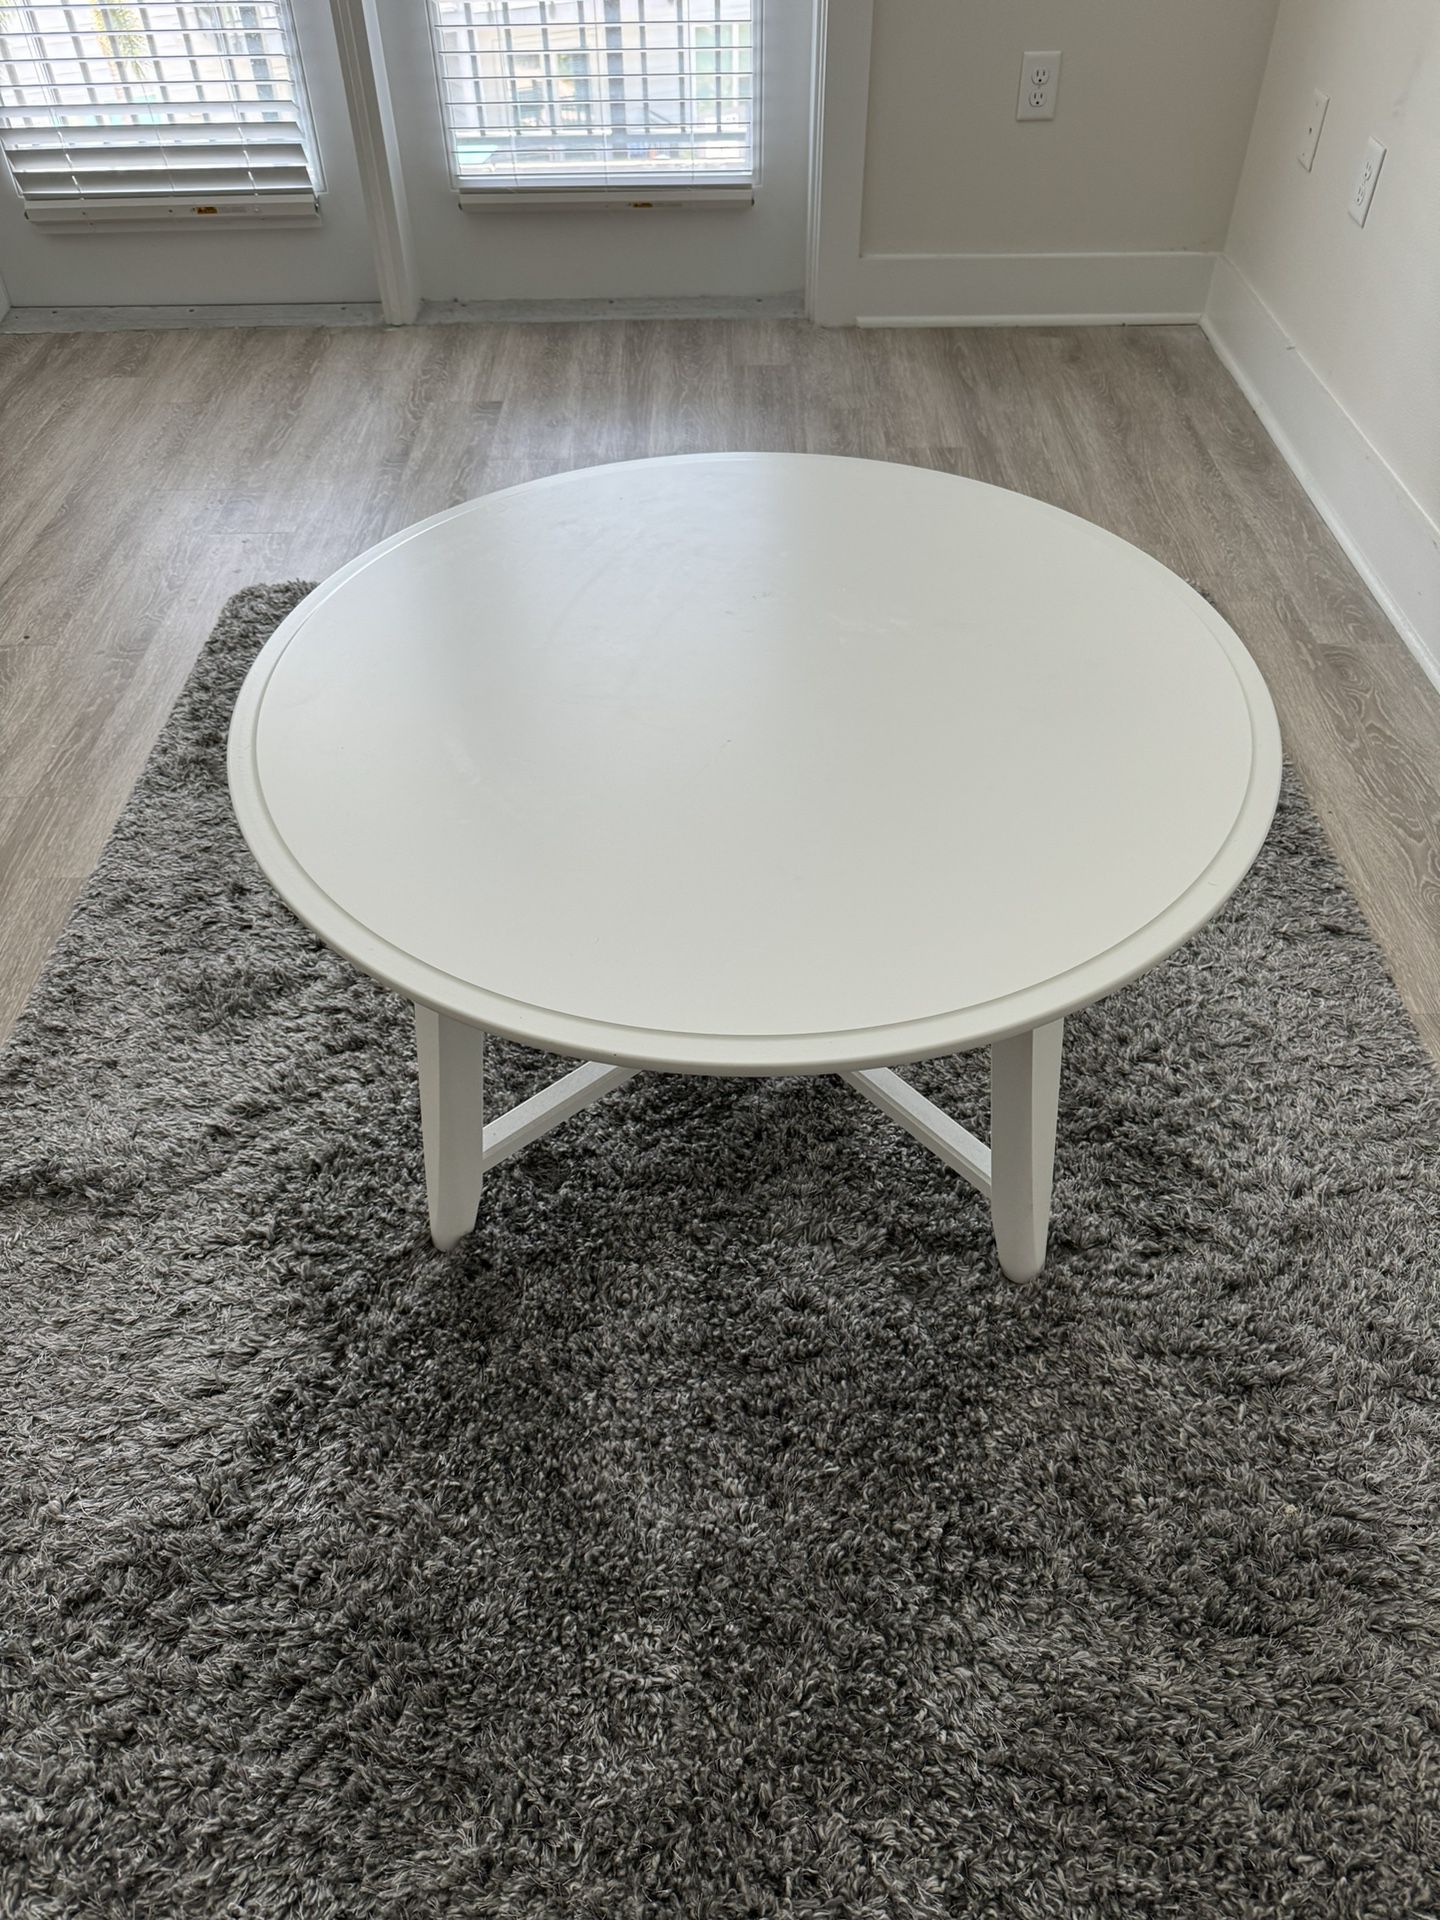 Round White Coffee Table in Great Condition